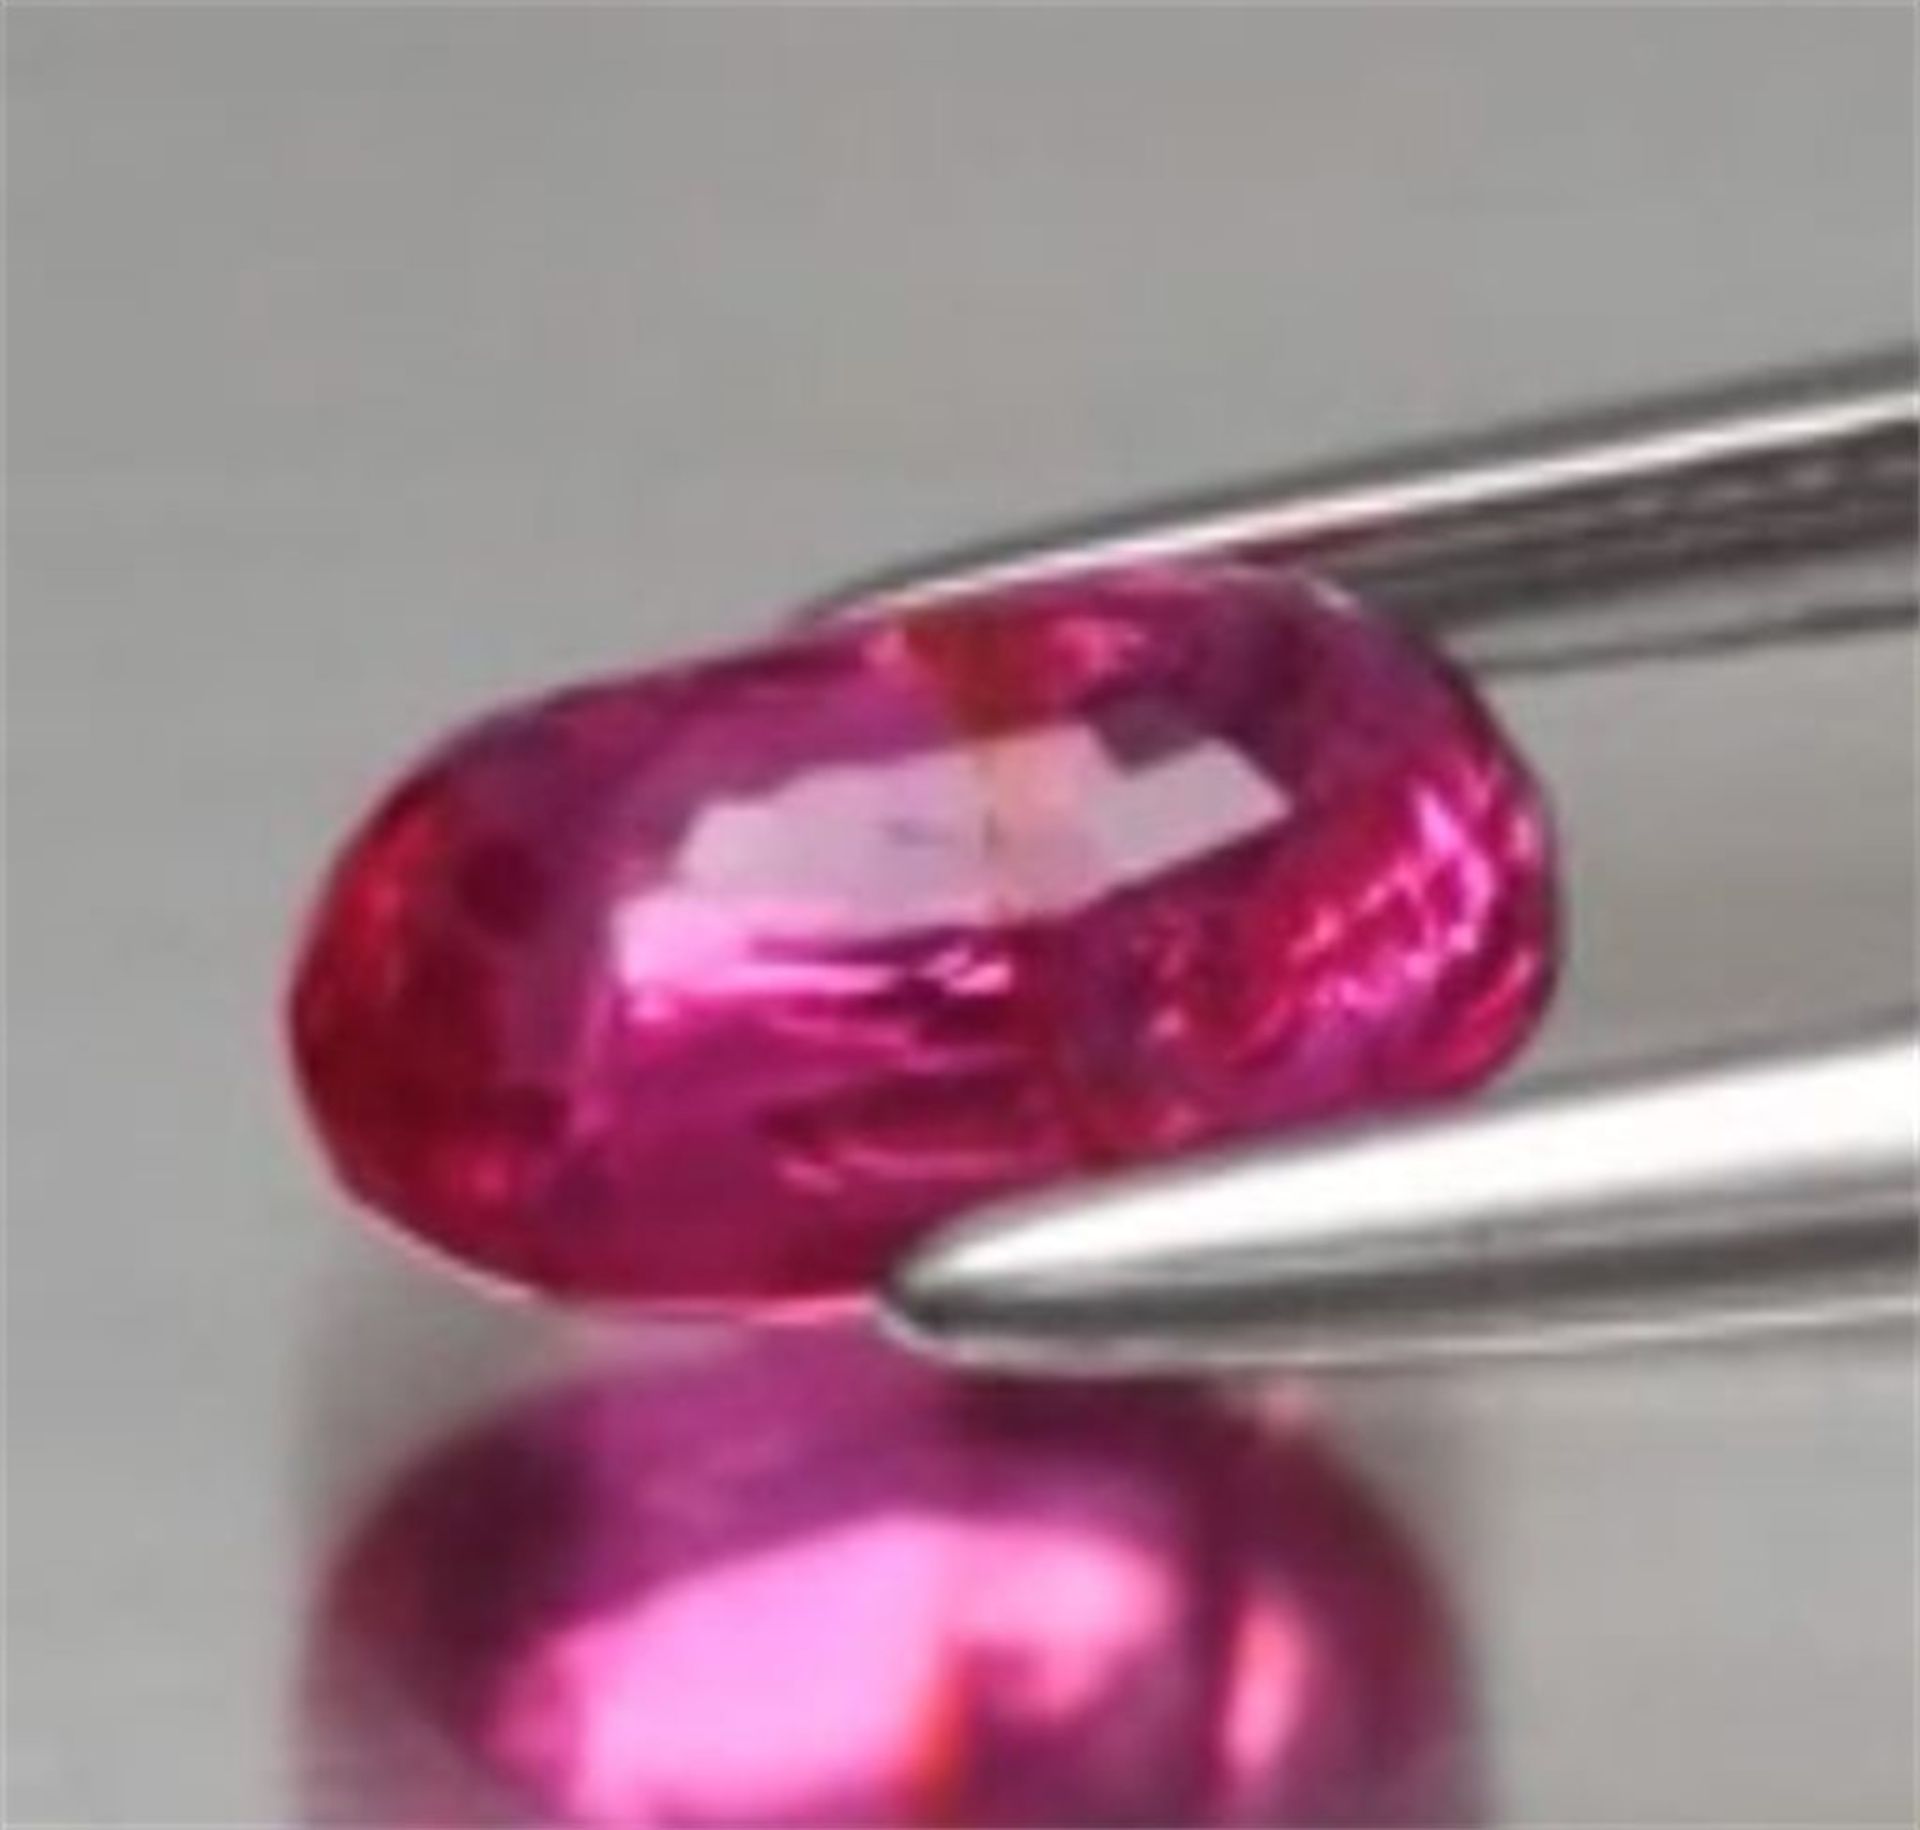 LOTUS Certified 0.99 ct. Hot Pink Sapphire MOZAMBIQUE - Image 6 of 10